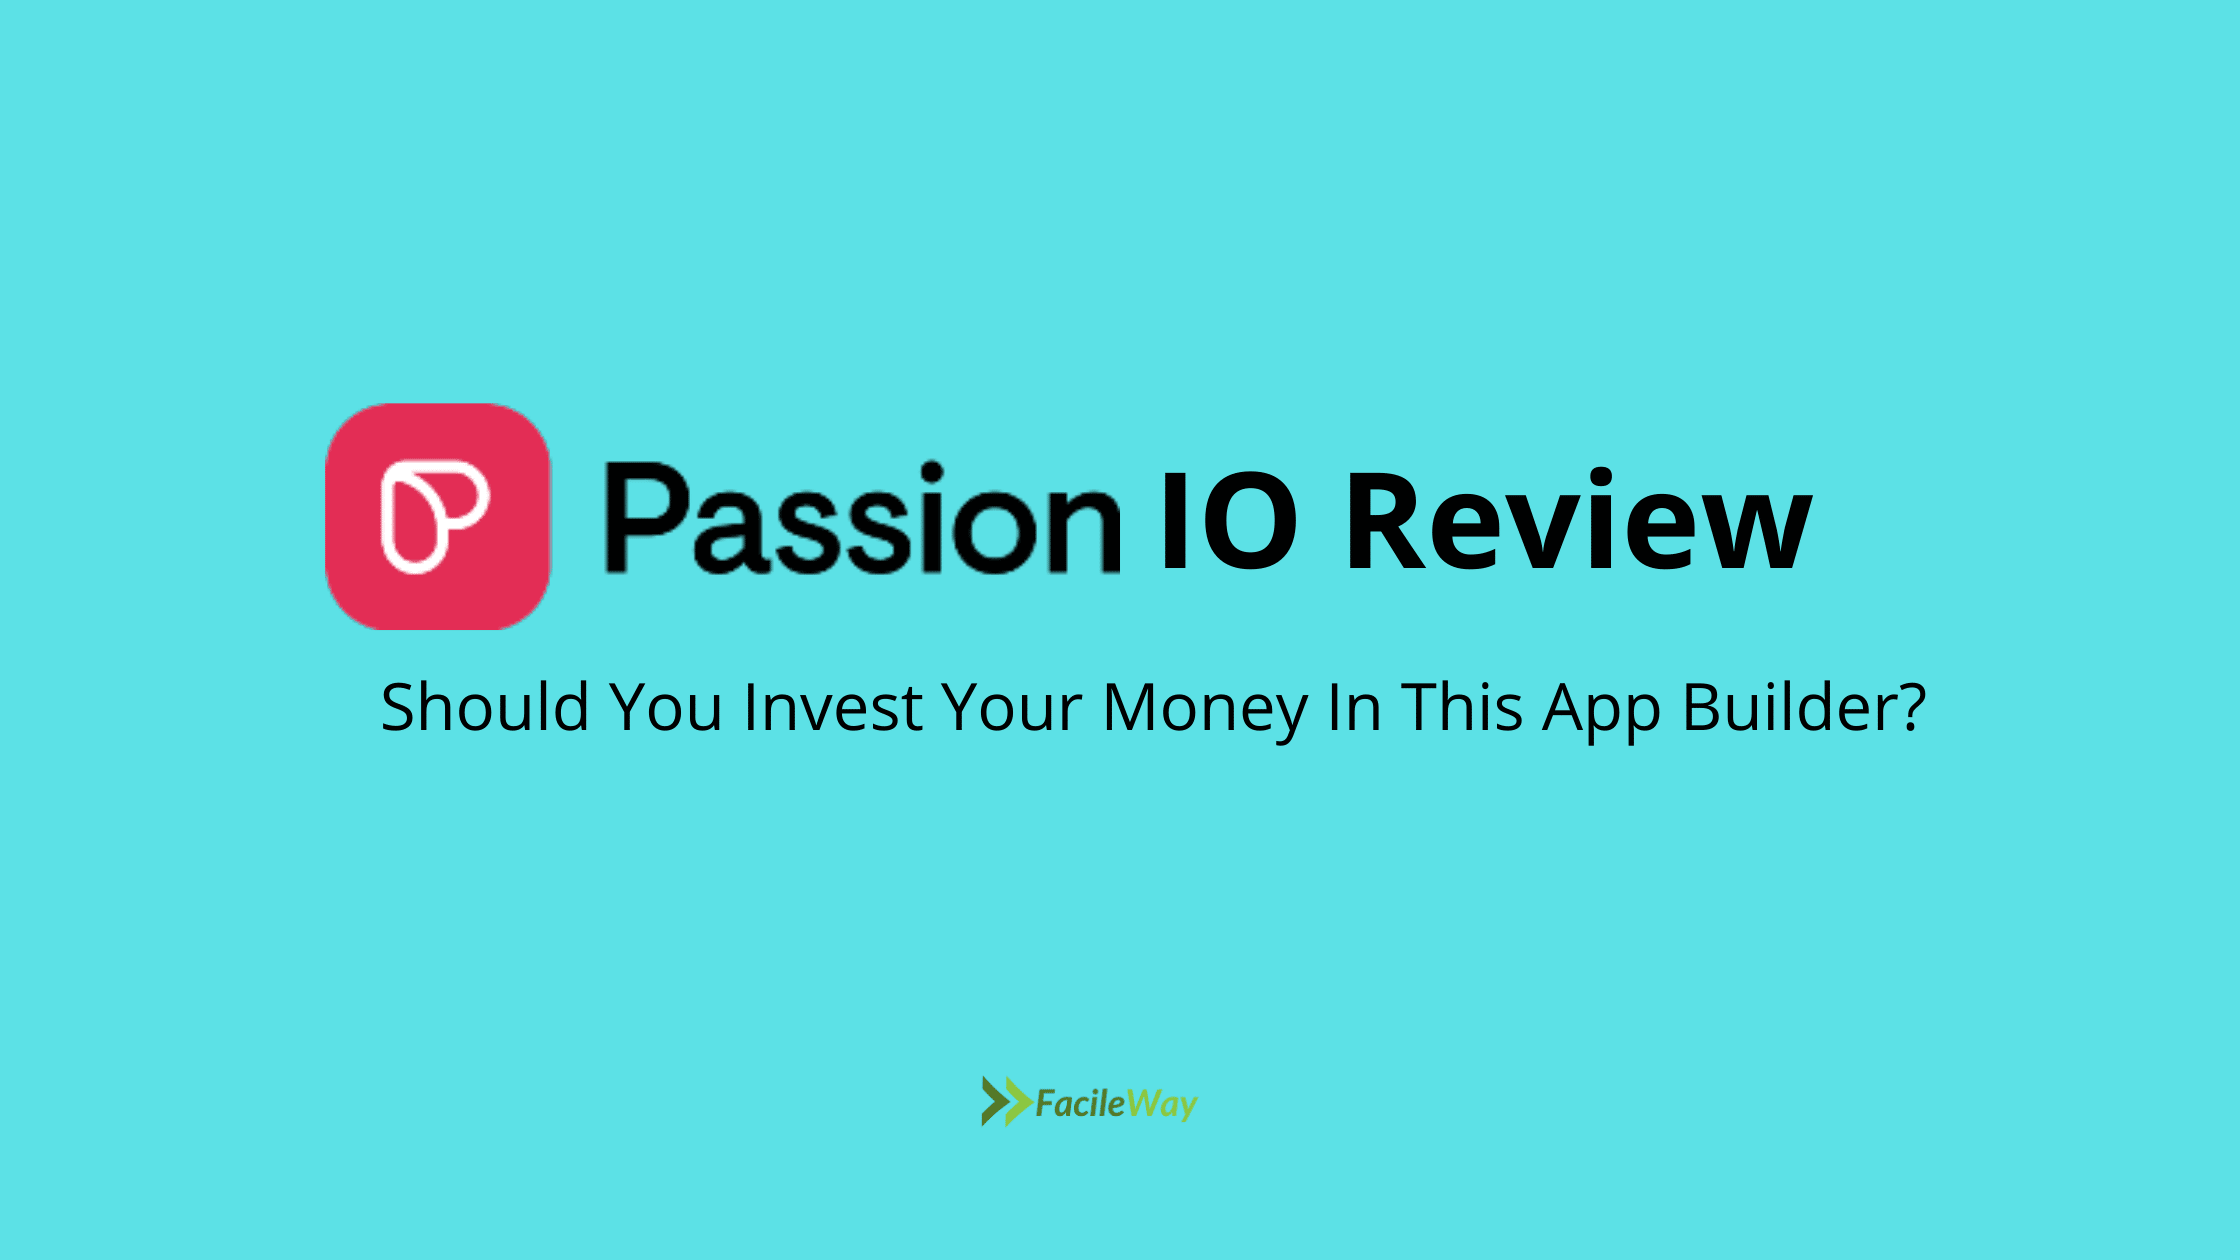 Passion IO Review